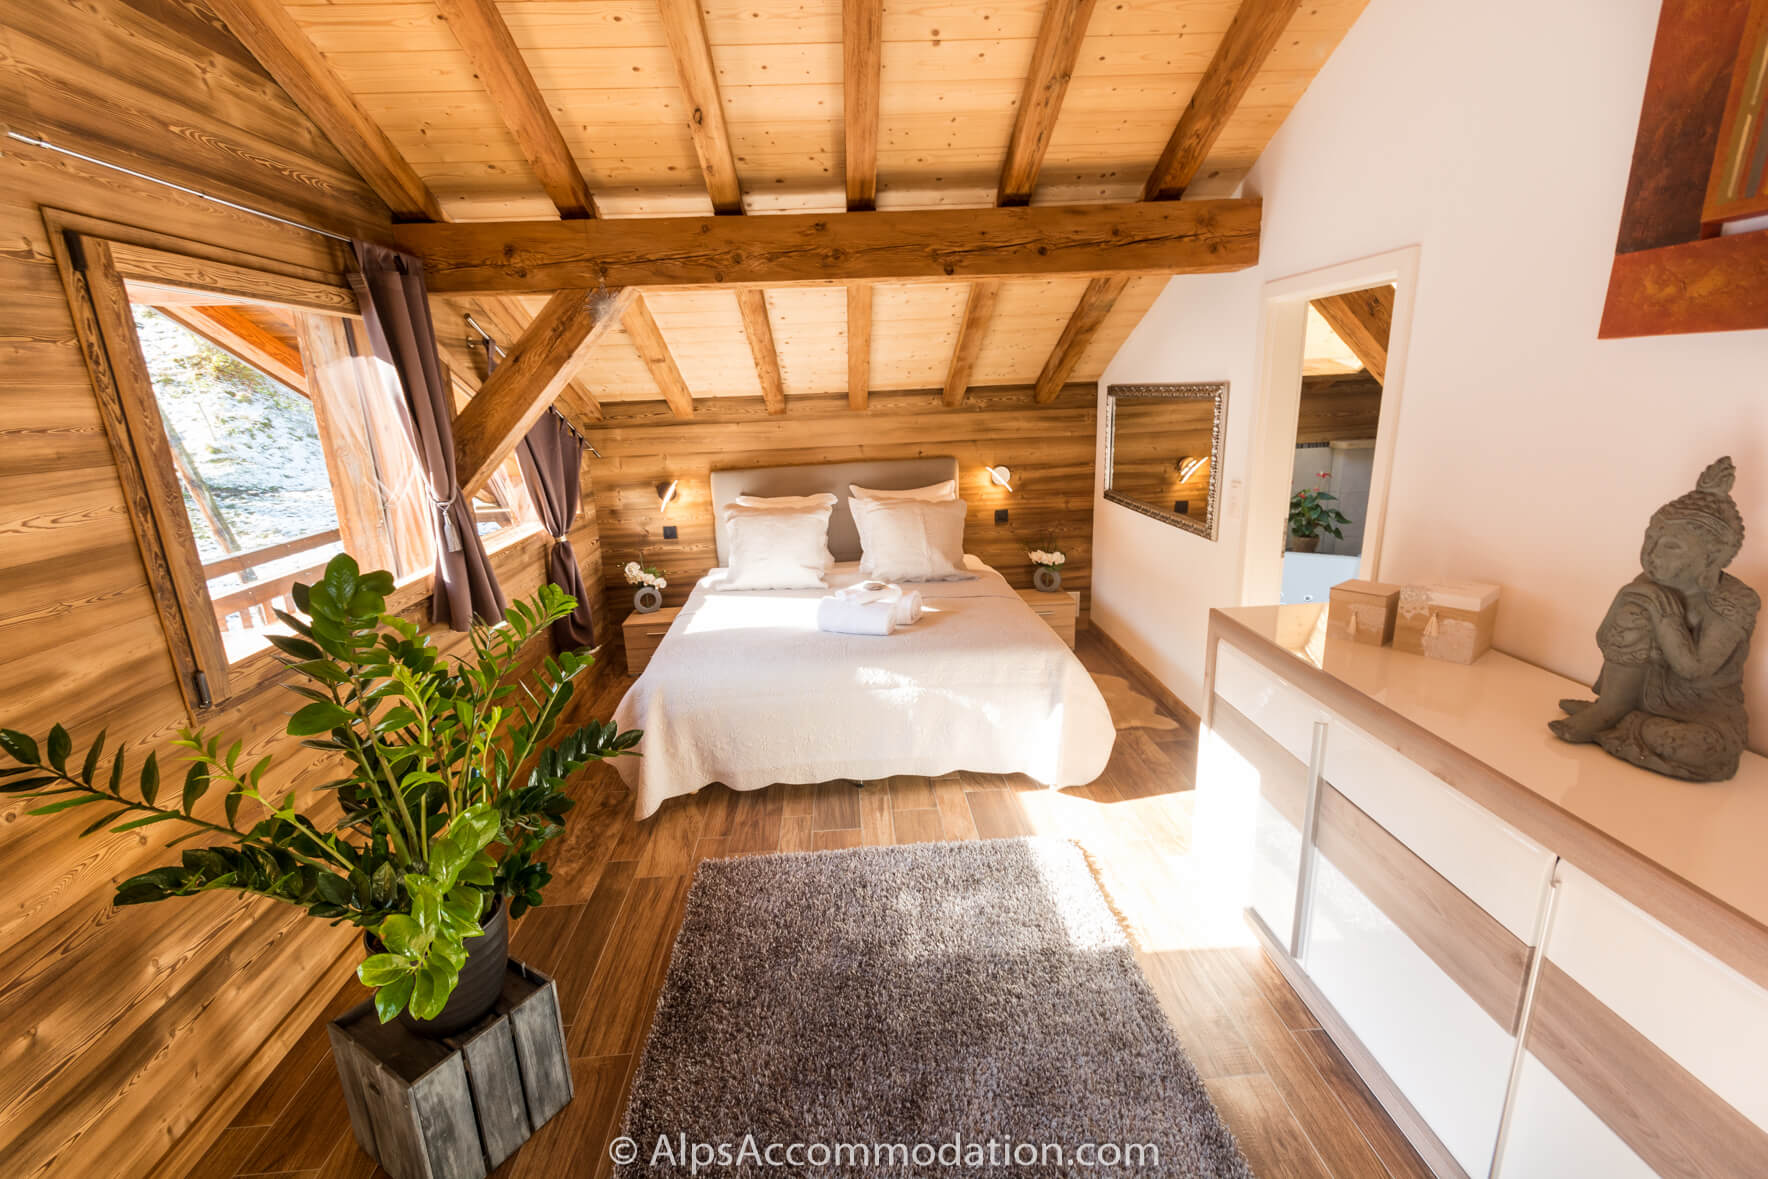 Chalet Sole Mio Morillon - The magnificent master bedroom with shared ensuite bathroom and private balcony